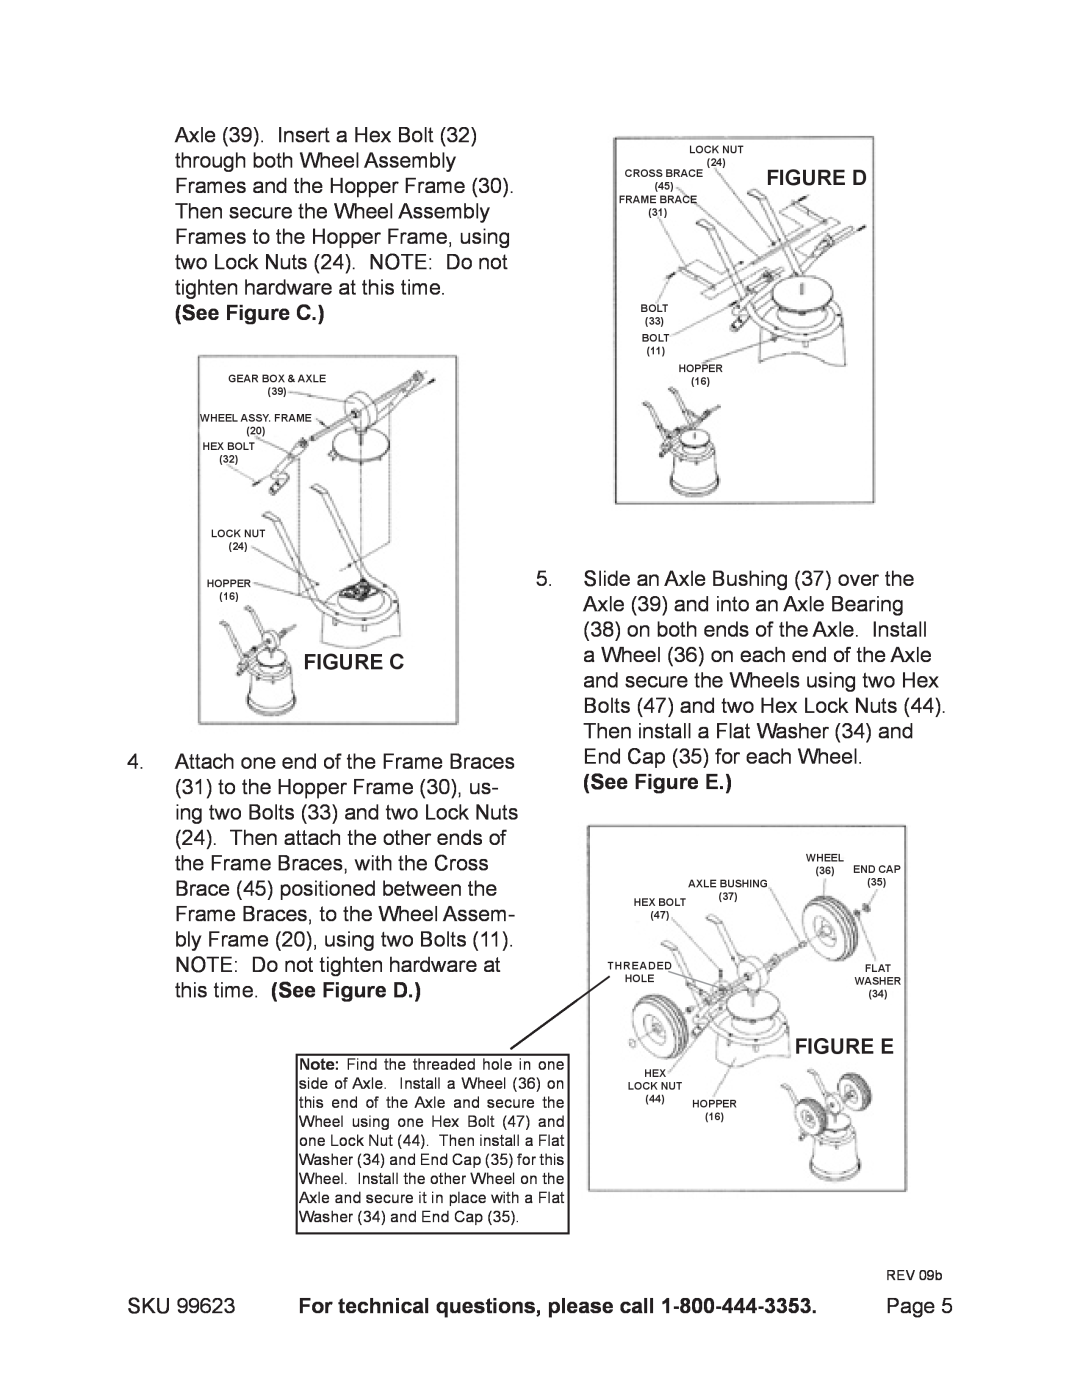 Harbor Freight Tools 99623 manual See Figure C, See Figure E, For technical questions, please call 